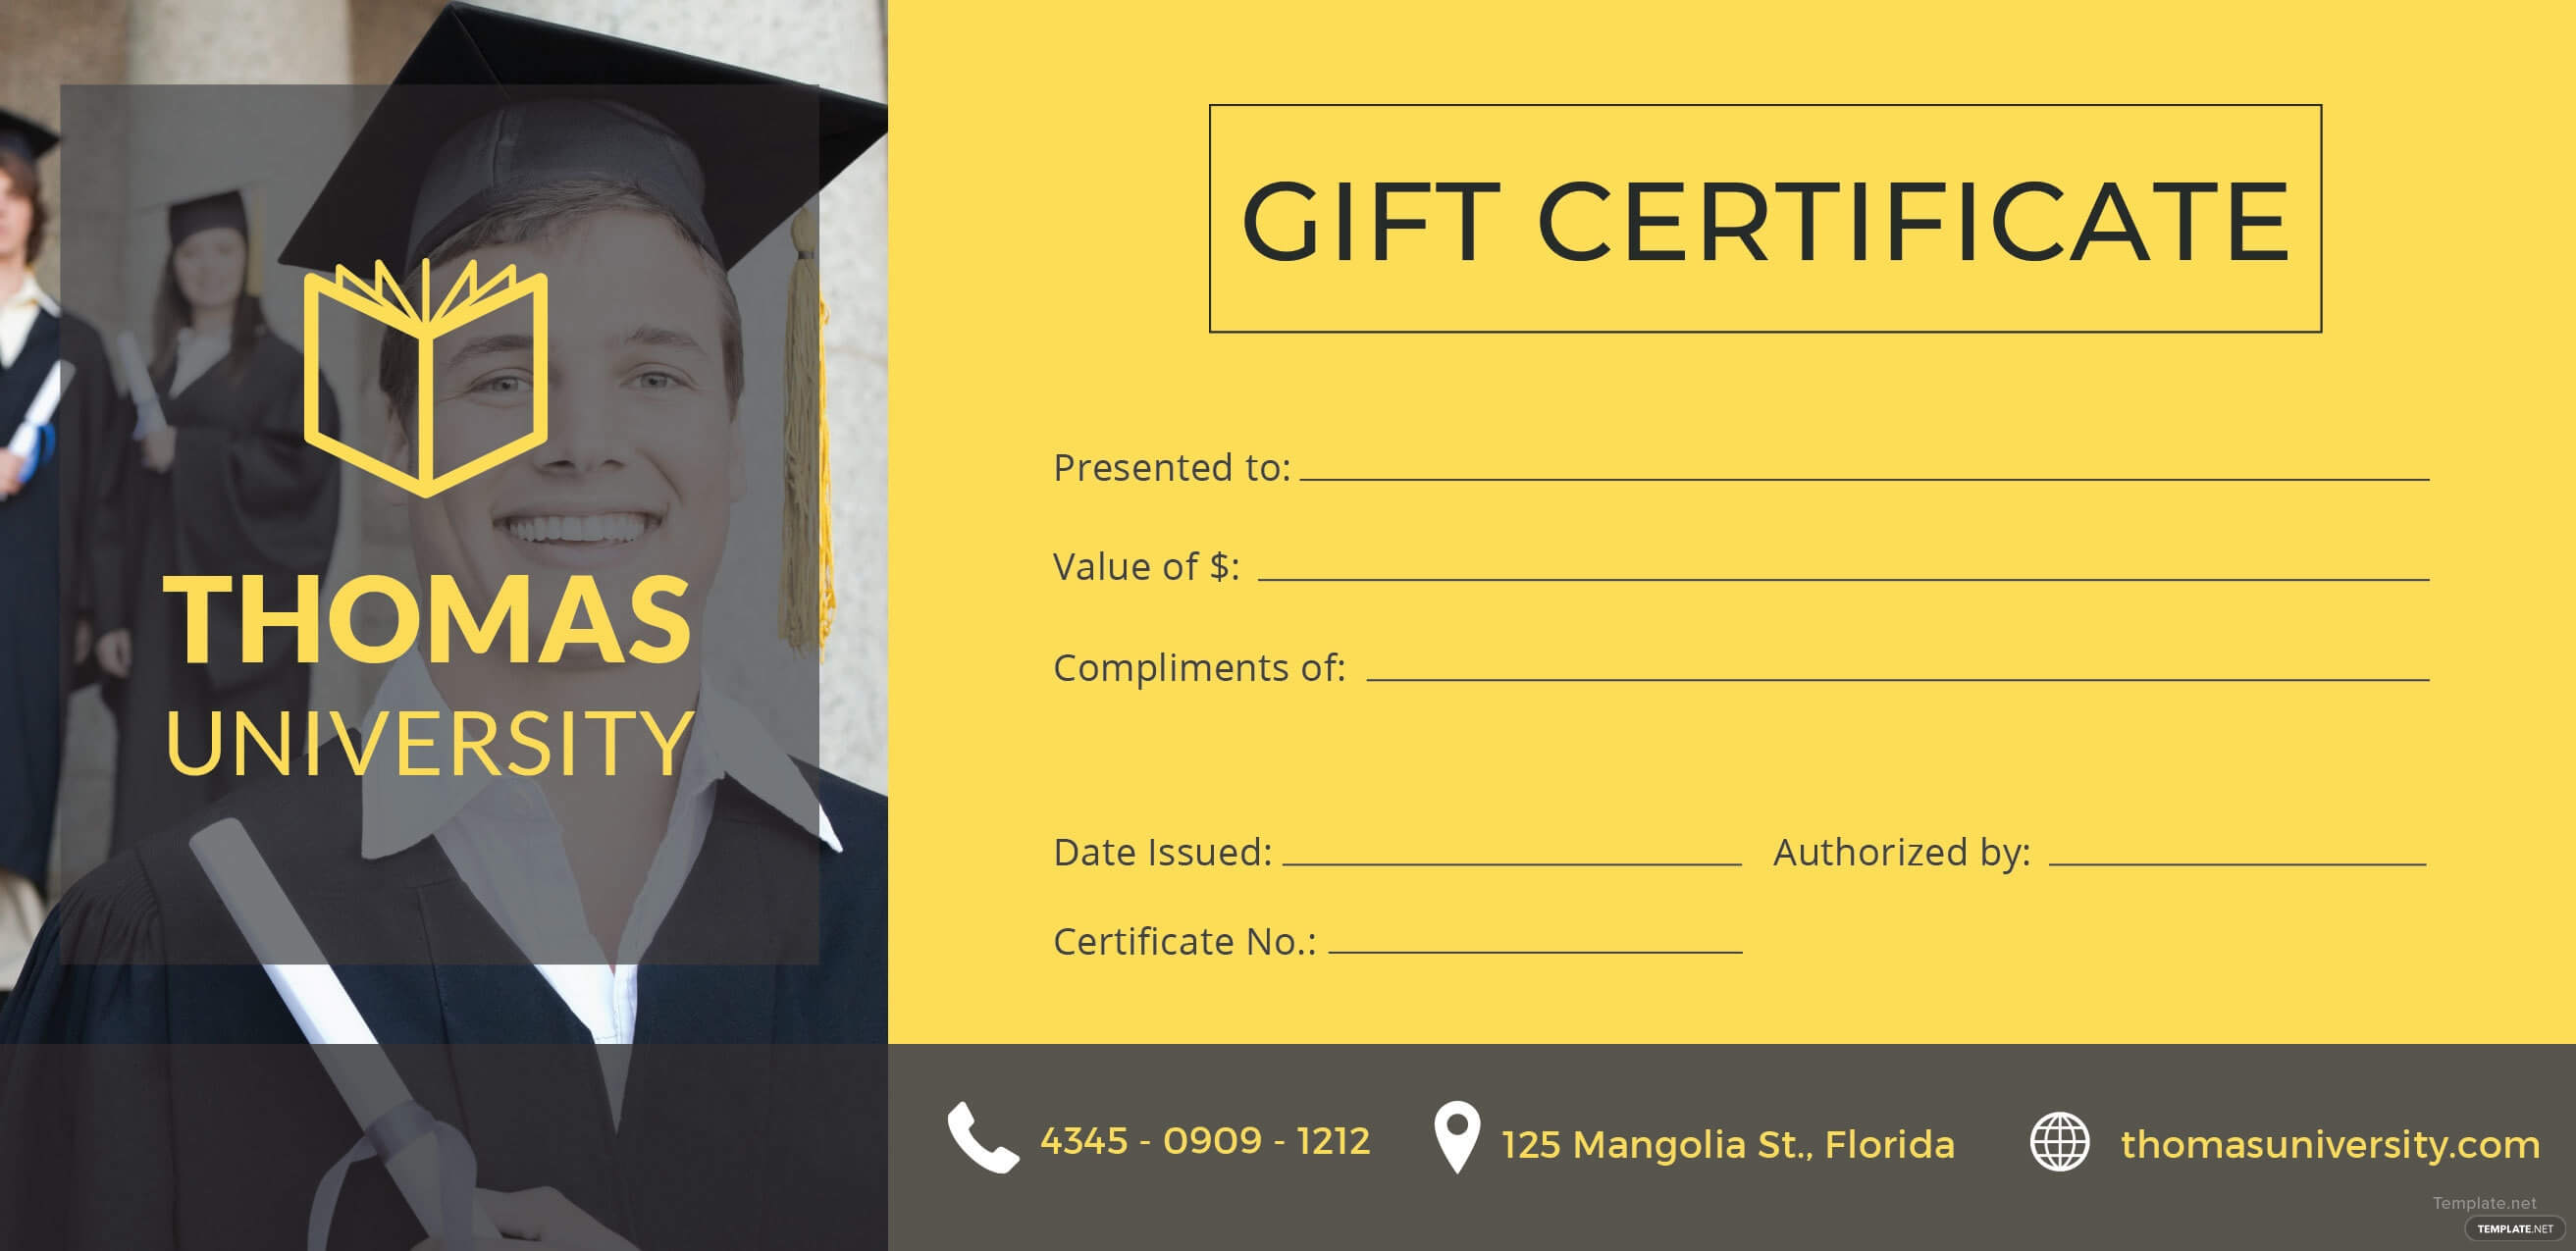 Certificate Templates: Free Graduation Gift Certificate Intended For Graduation Gift Certificate Template Free